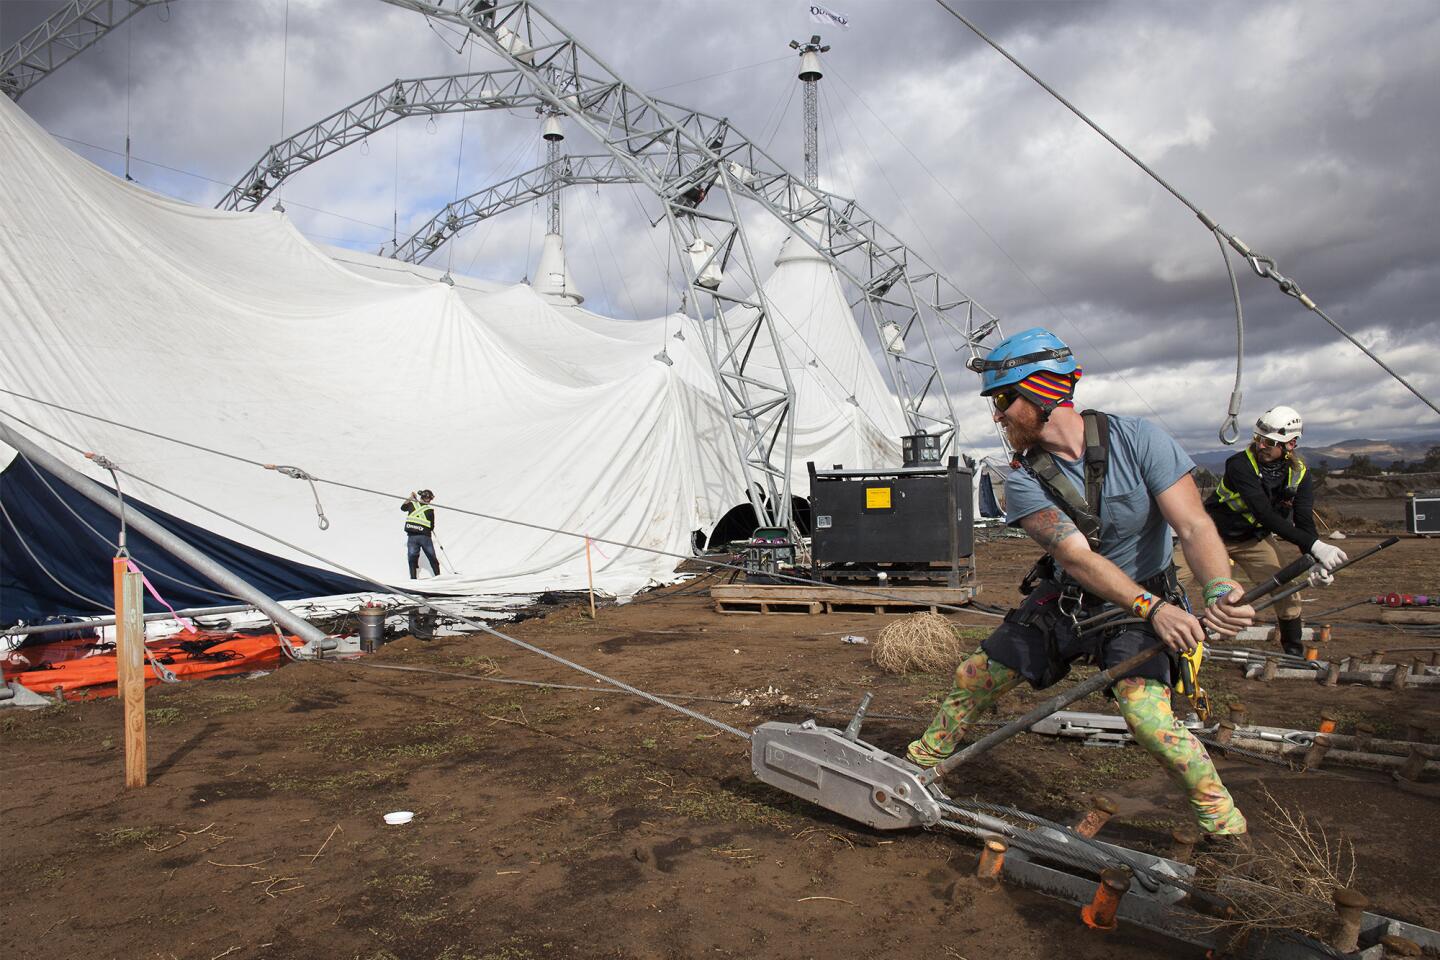 Crew members Max Arcand, second from right, and Kevin Rienks, far right, work on raising the world's largest tent in preparation for Orange County's debut of "Odysseo," by Cavalia, in Irvine on Thursday.